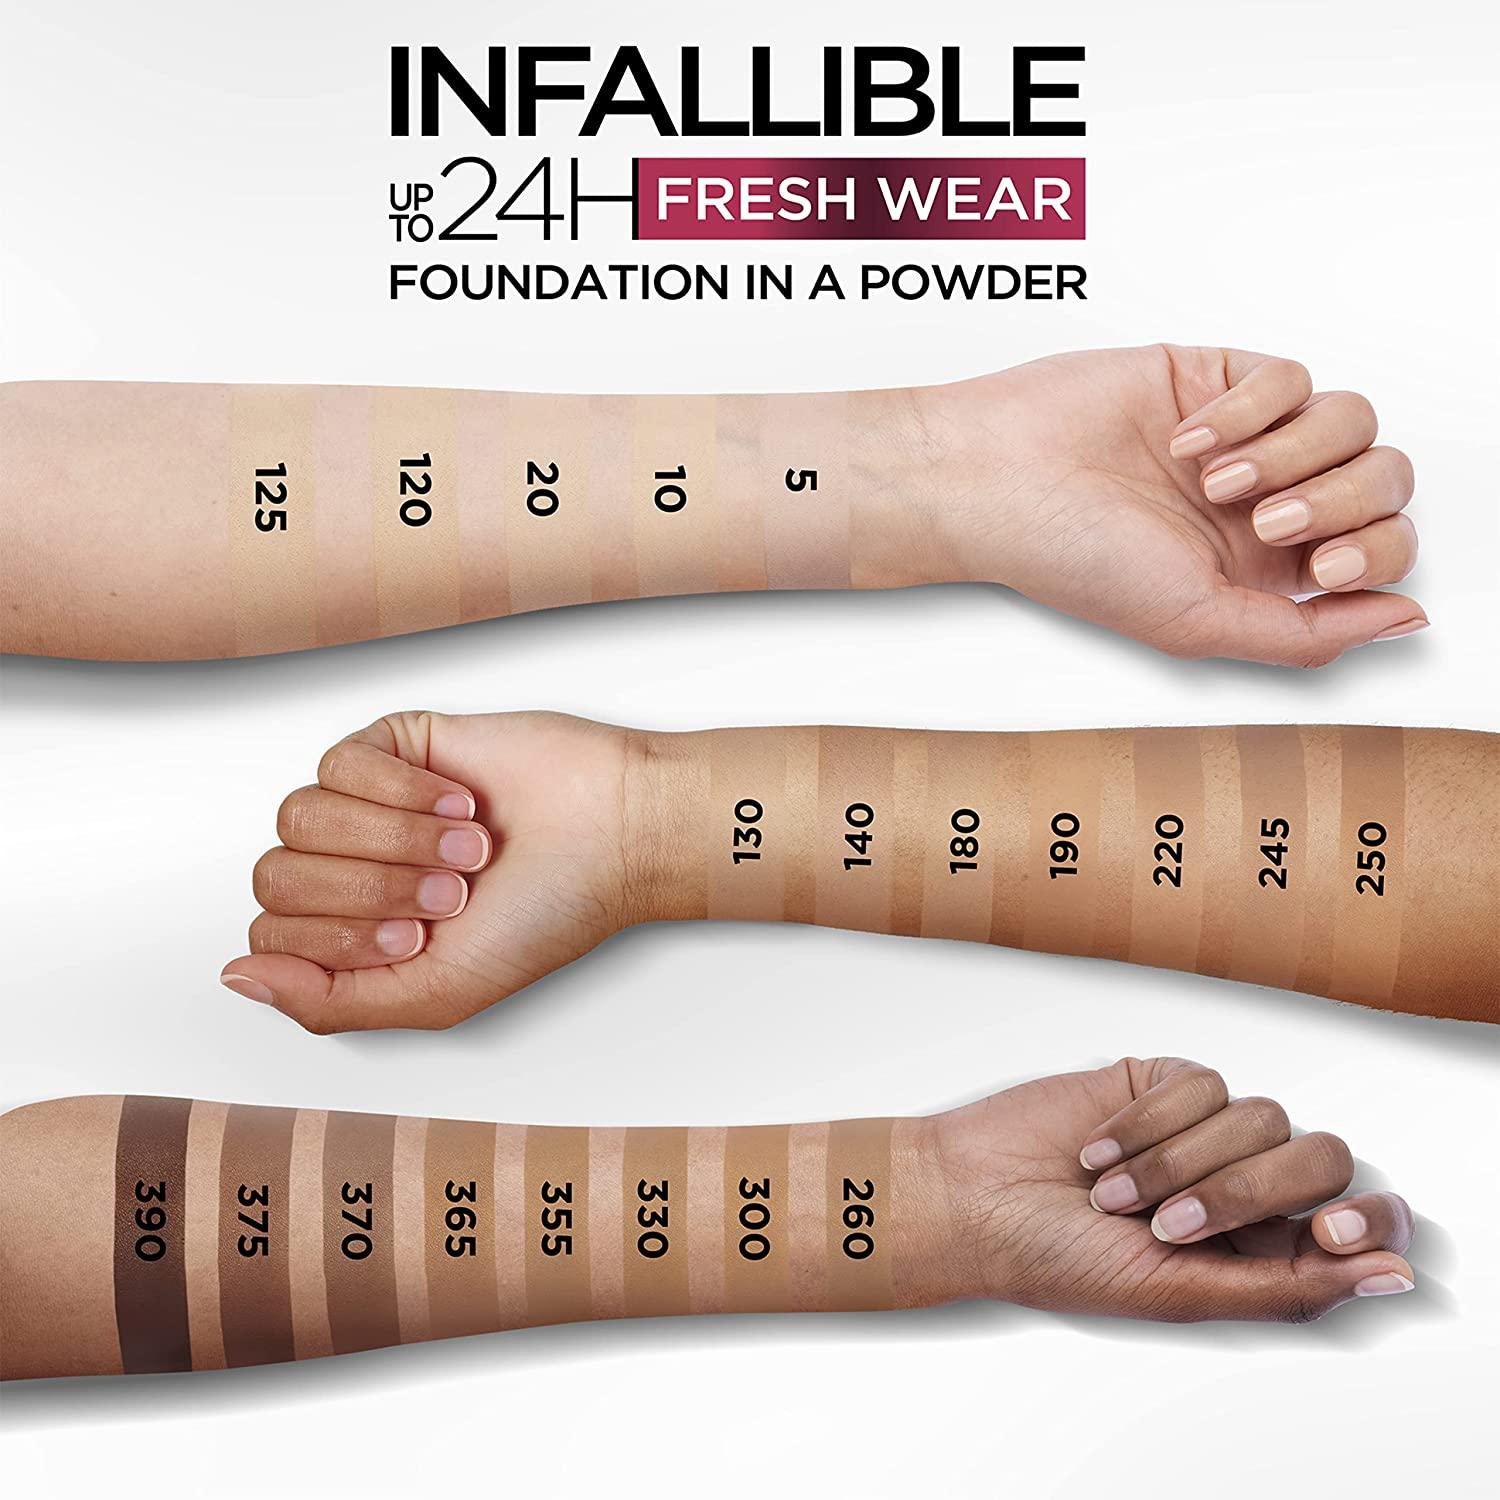 loreal infallible foundation powder color match